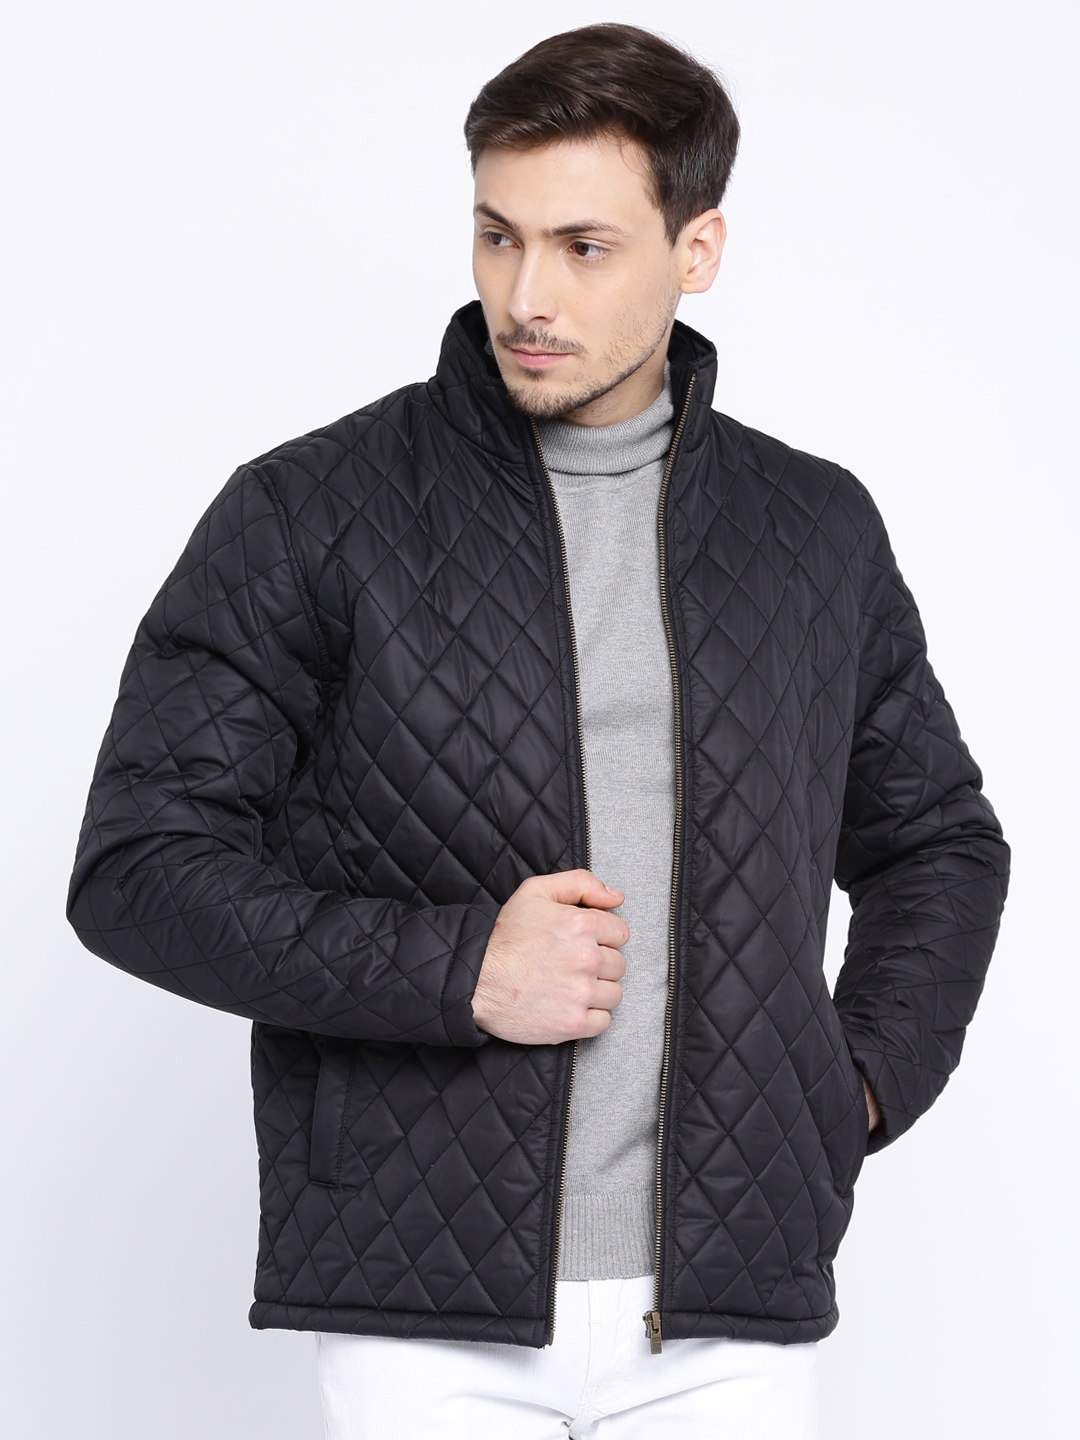 Buy Pepe Jeans Black Quilted Jacket - Jackets for Men 1633052 | Myntra